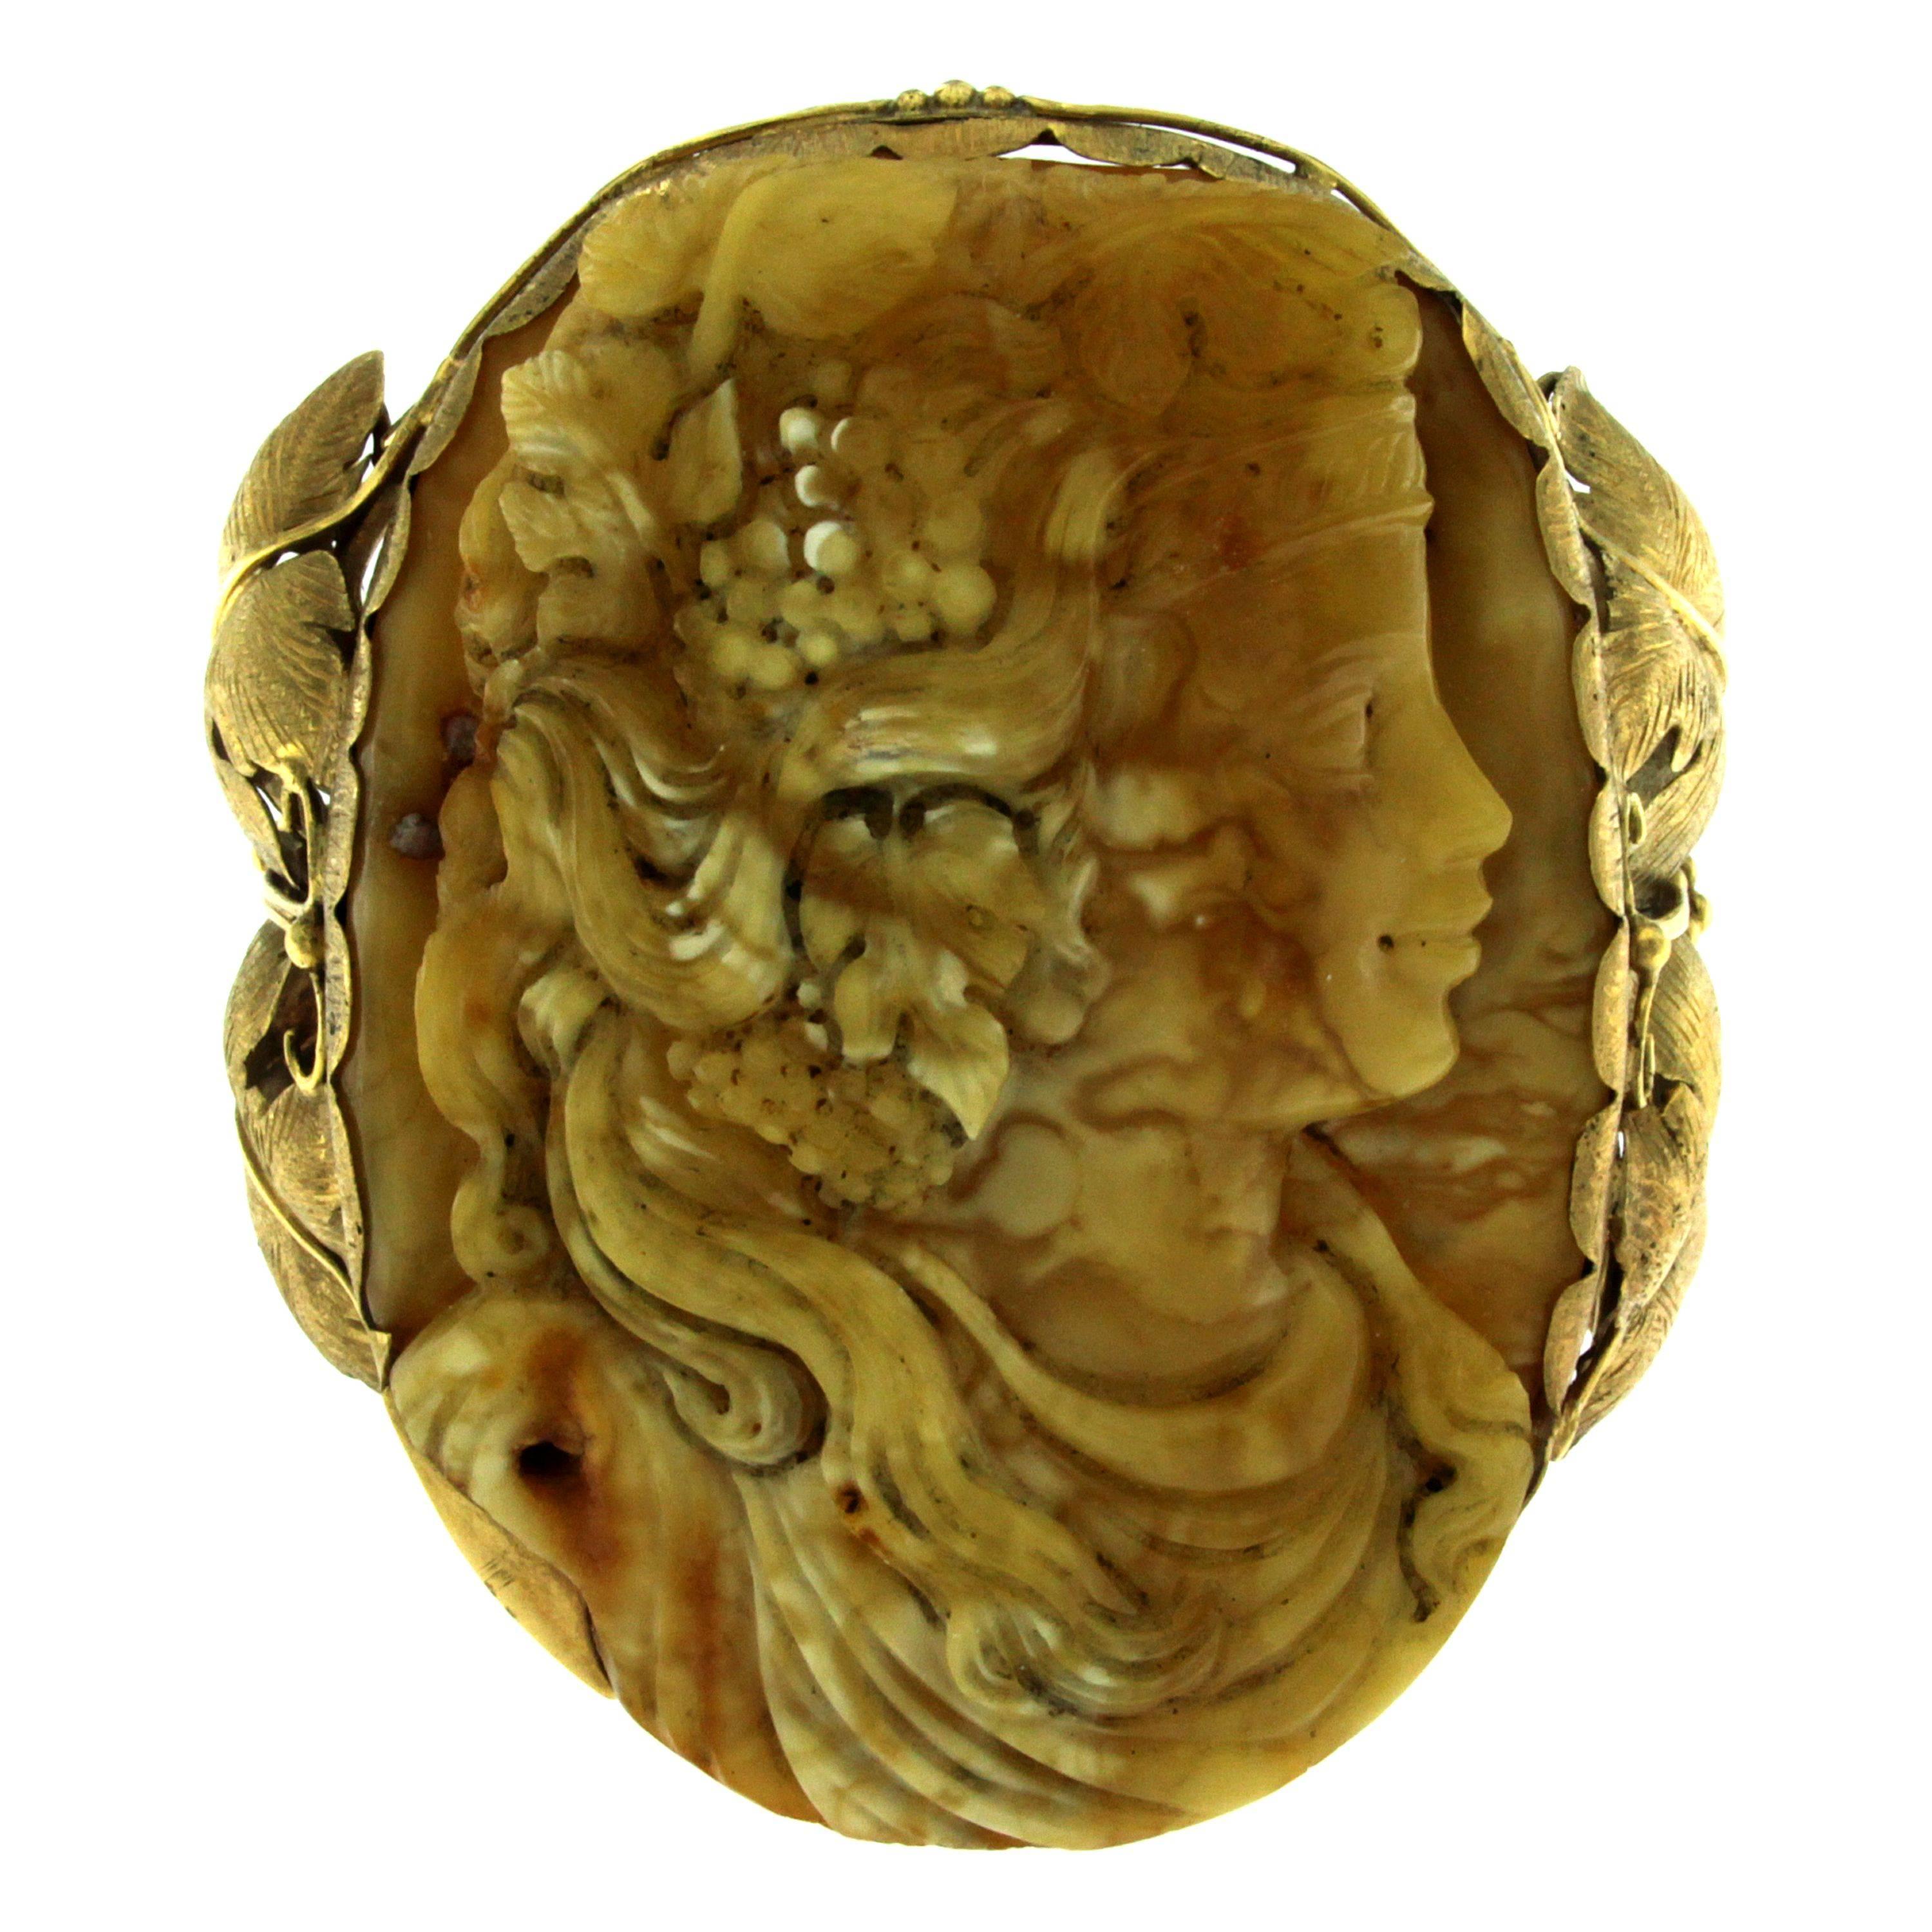 An exquisite Amber bangle bracelet handcrafted in 9 kt yellow Gold designed with a an engaging motif of a woman's face and with leaf and grape motif finely detailed. It is engraved at the edges and the joints. 
Secure catch. 
Dimensions are